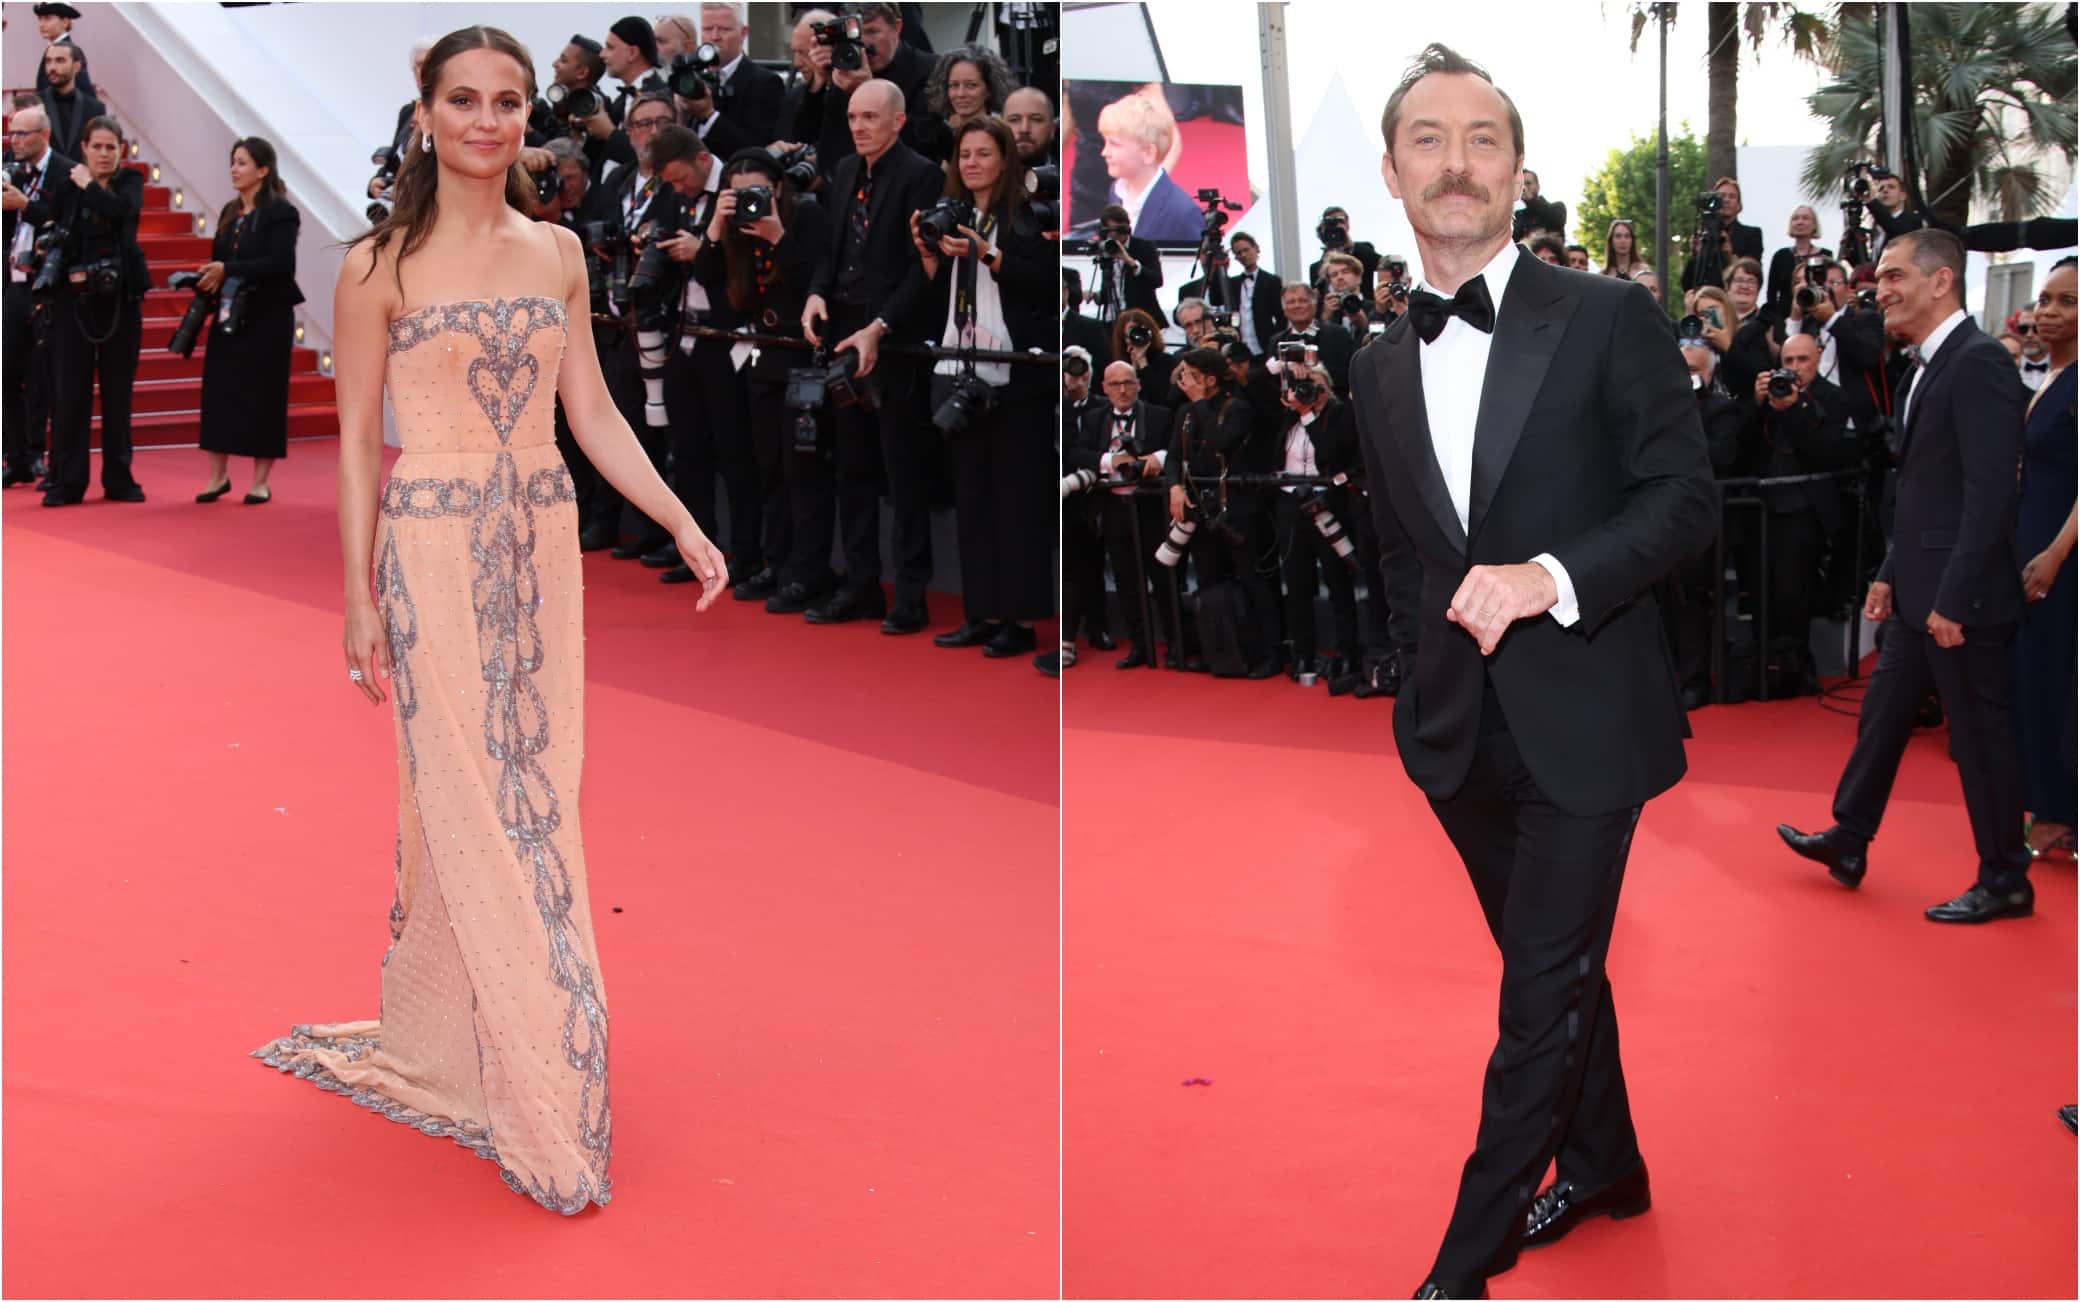 Jude Law and Alicia Vikander donned matching outfits at Cannes